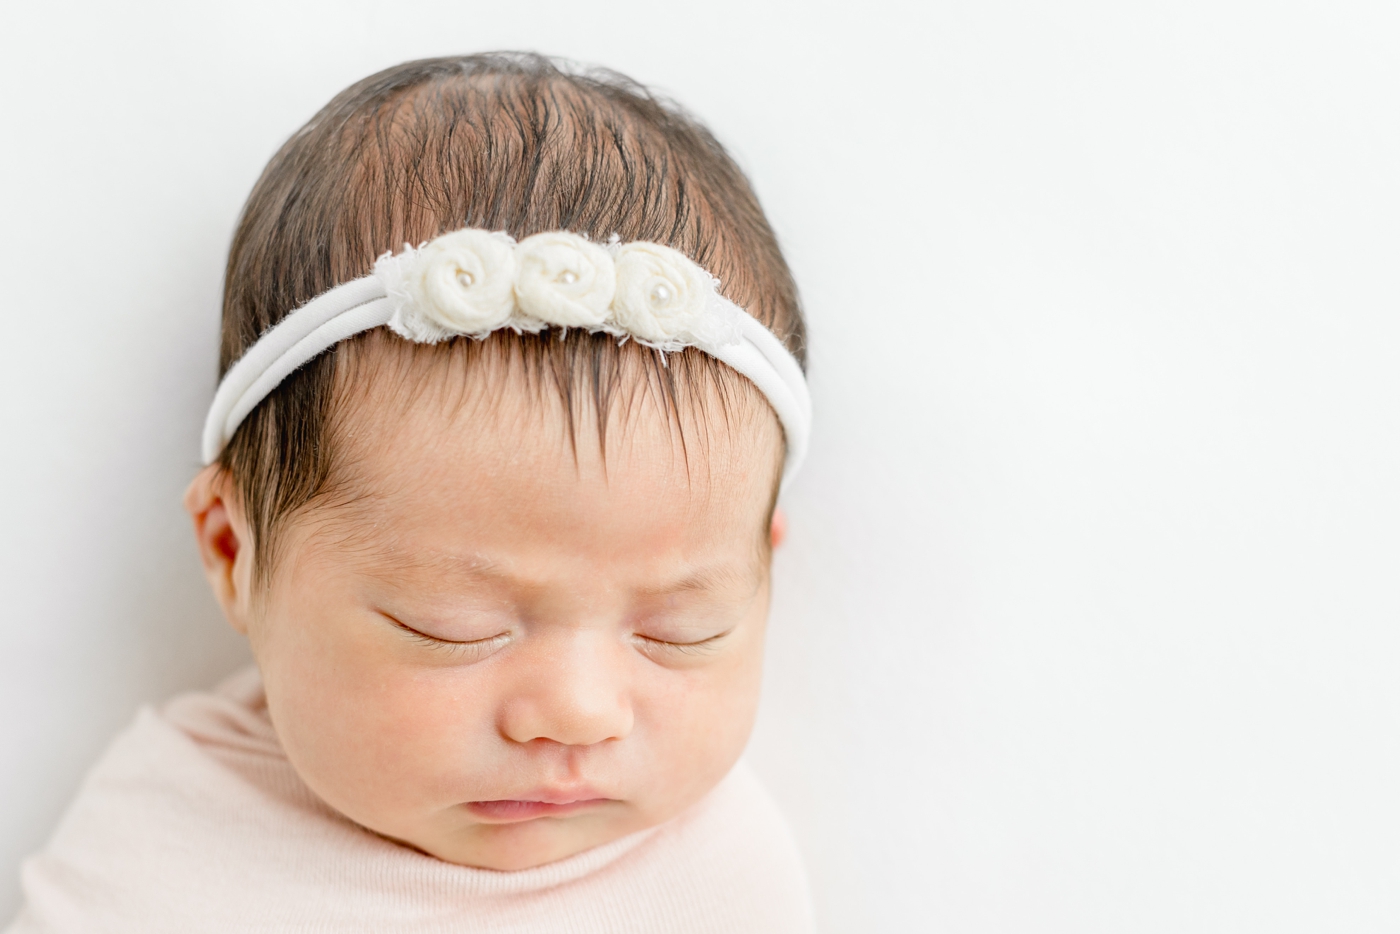 Newborn baby with dark hair and white headband sleeping during posed newborn session in Austin, TX studio. Photo by Sana Ahmed Photography.